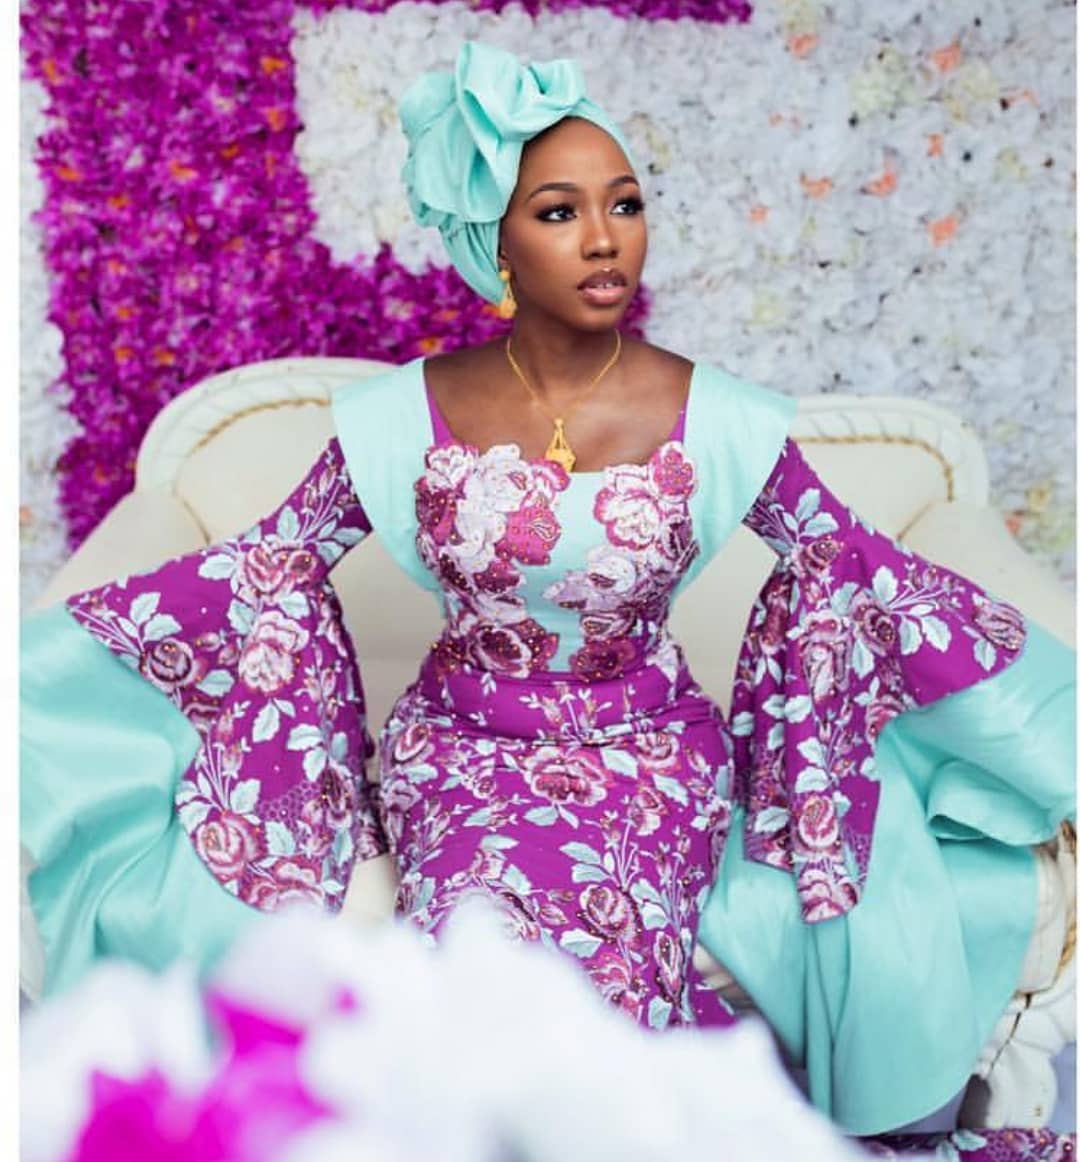 You Will Love These Northern Bridal Outfits